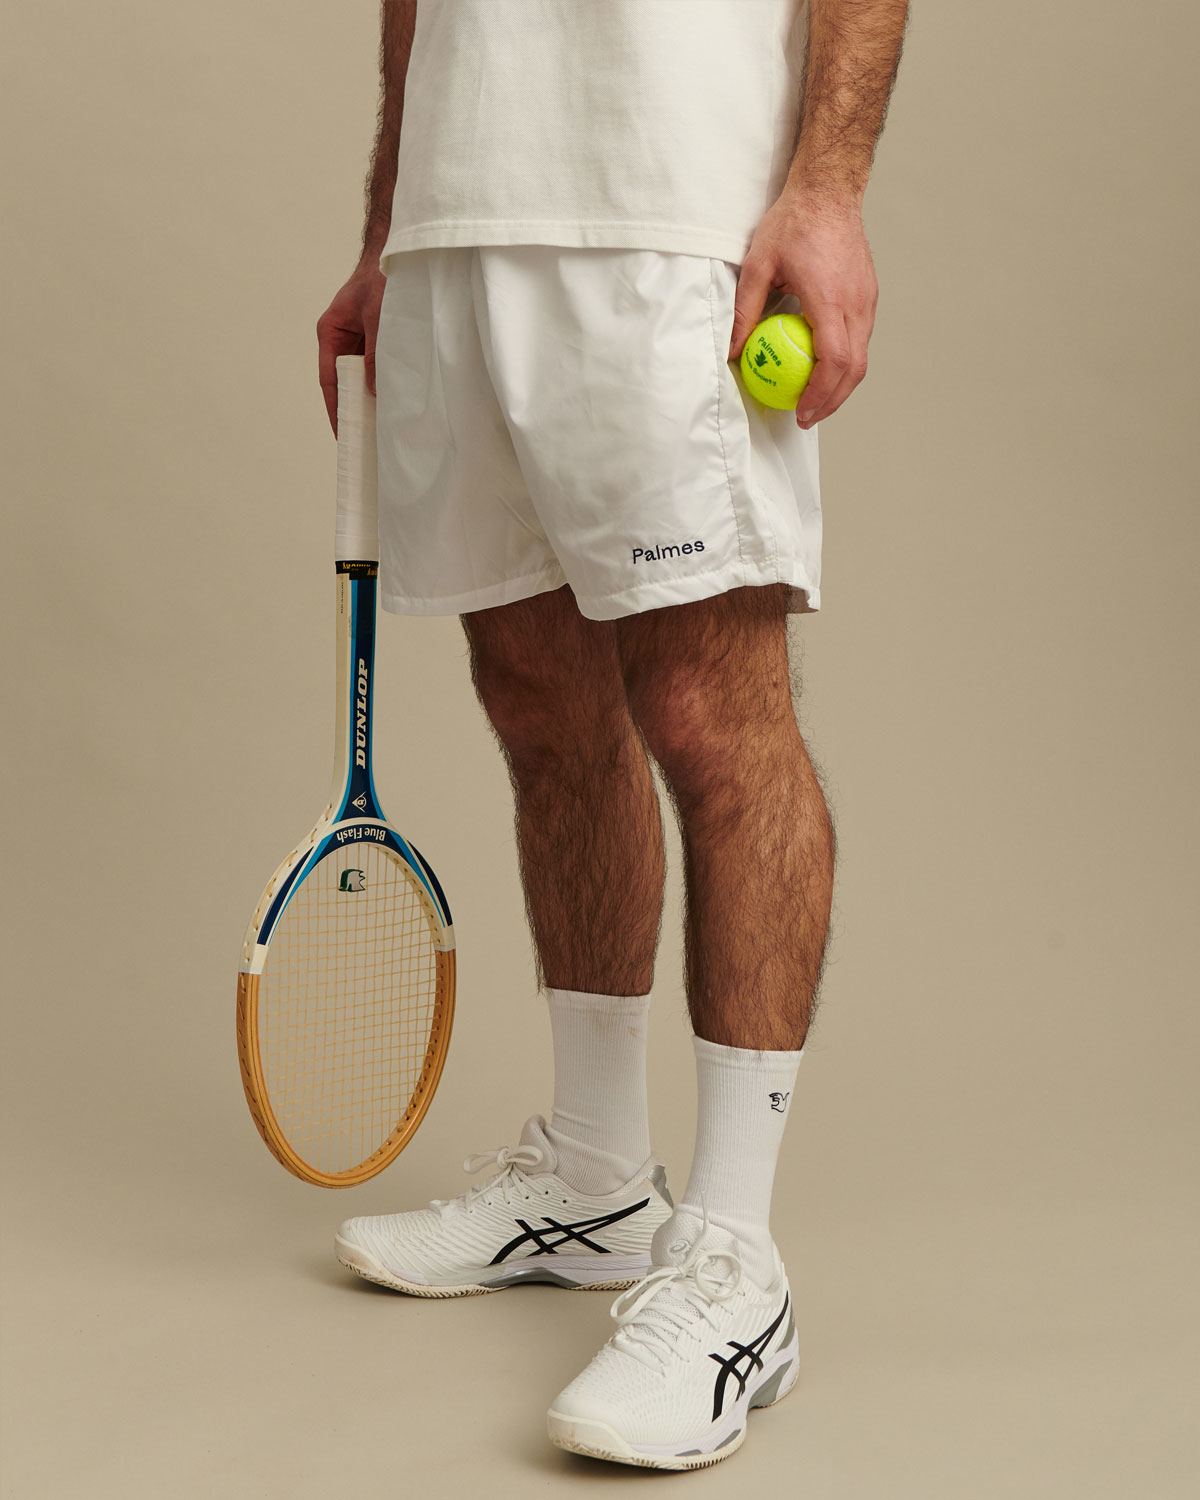 man wearing white tennis shorts while holding a yellow tennis ball and gold and blue tennis racket